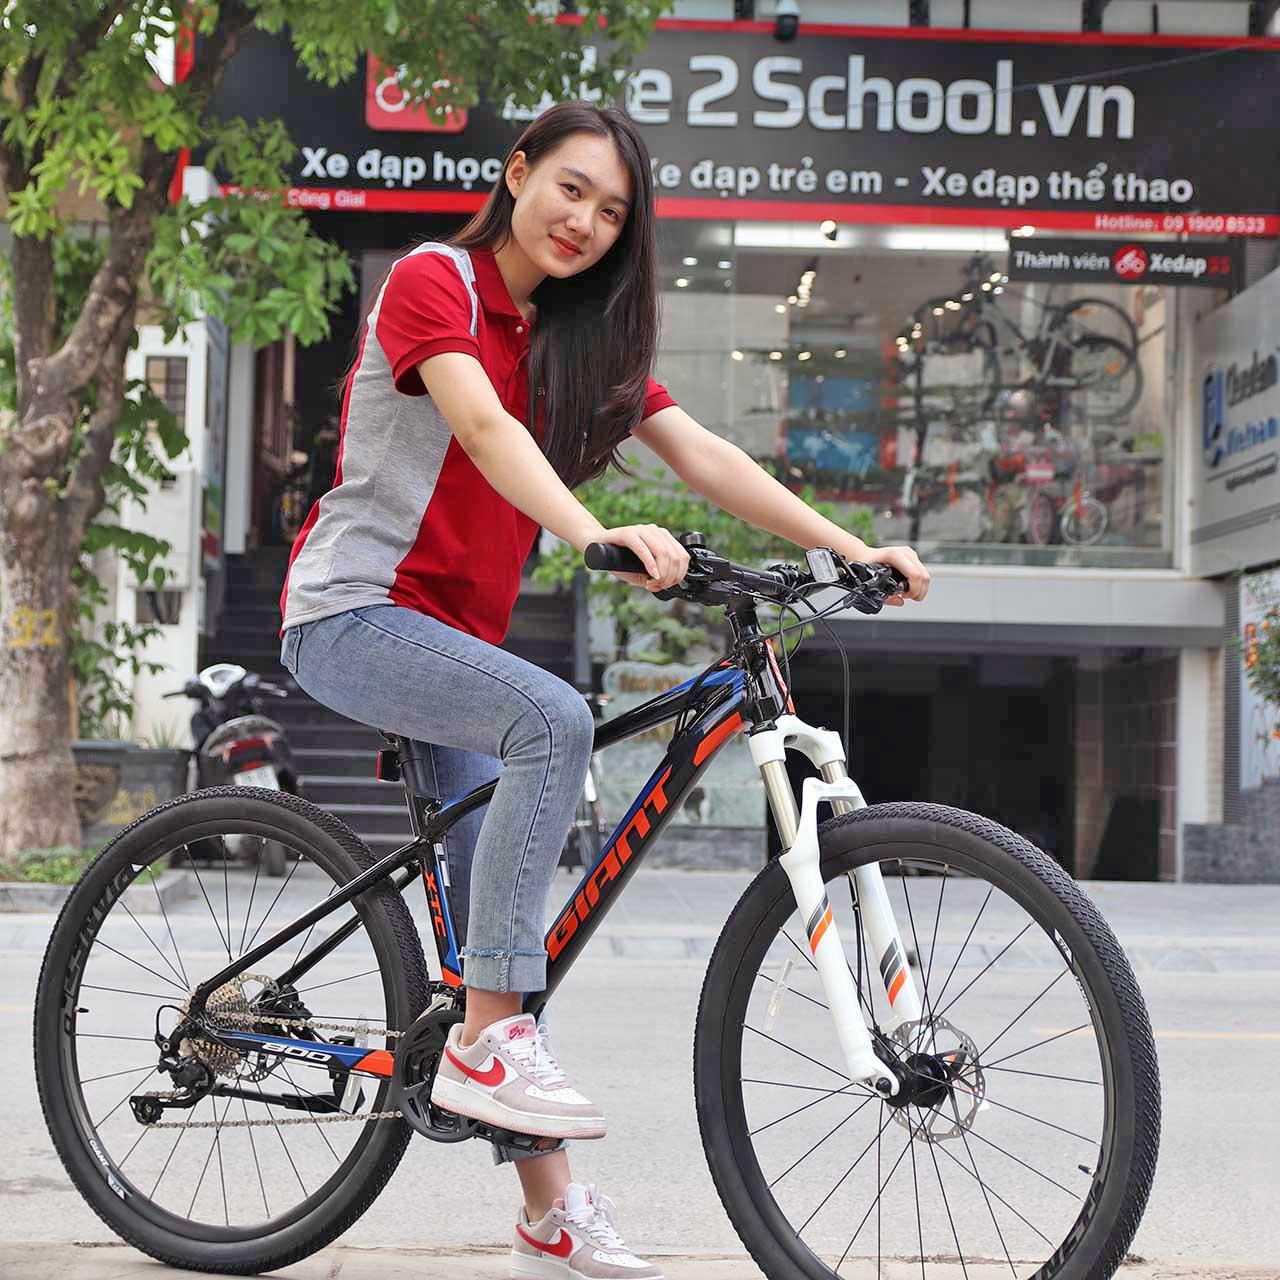 A person riding a bicycle

Description automatically generated with medium confidence